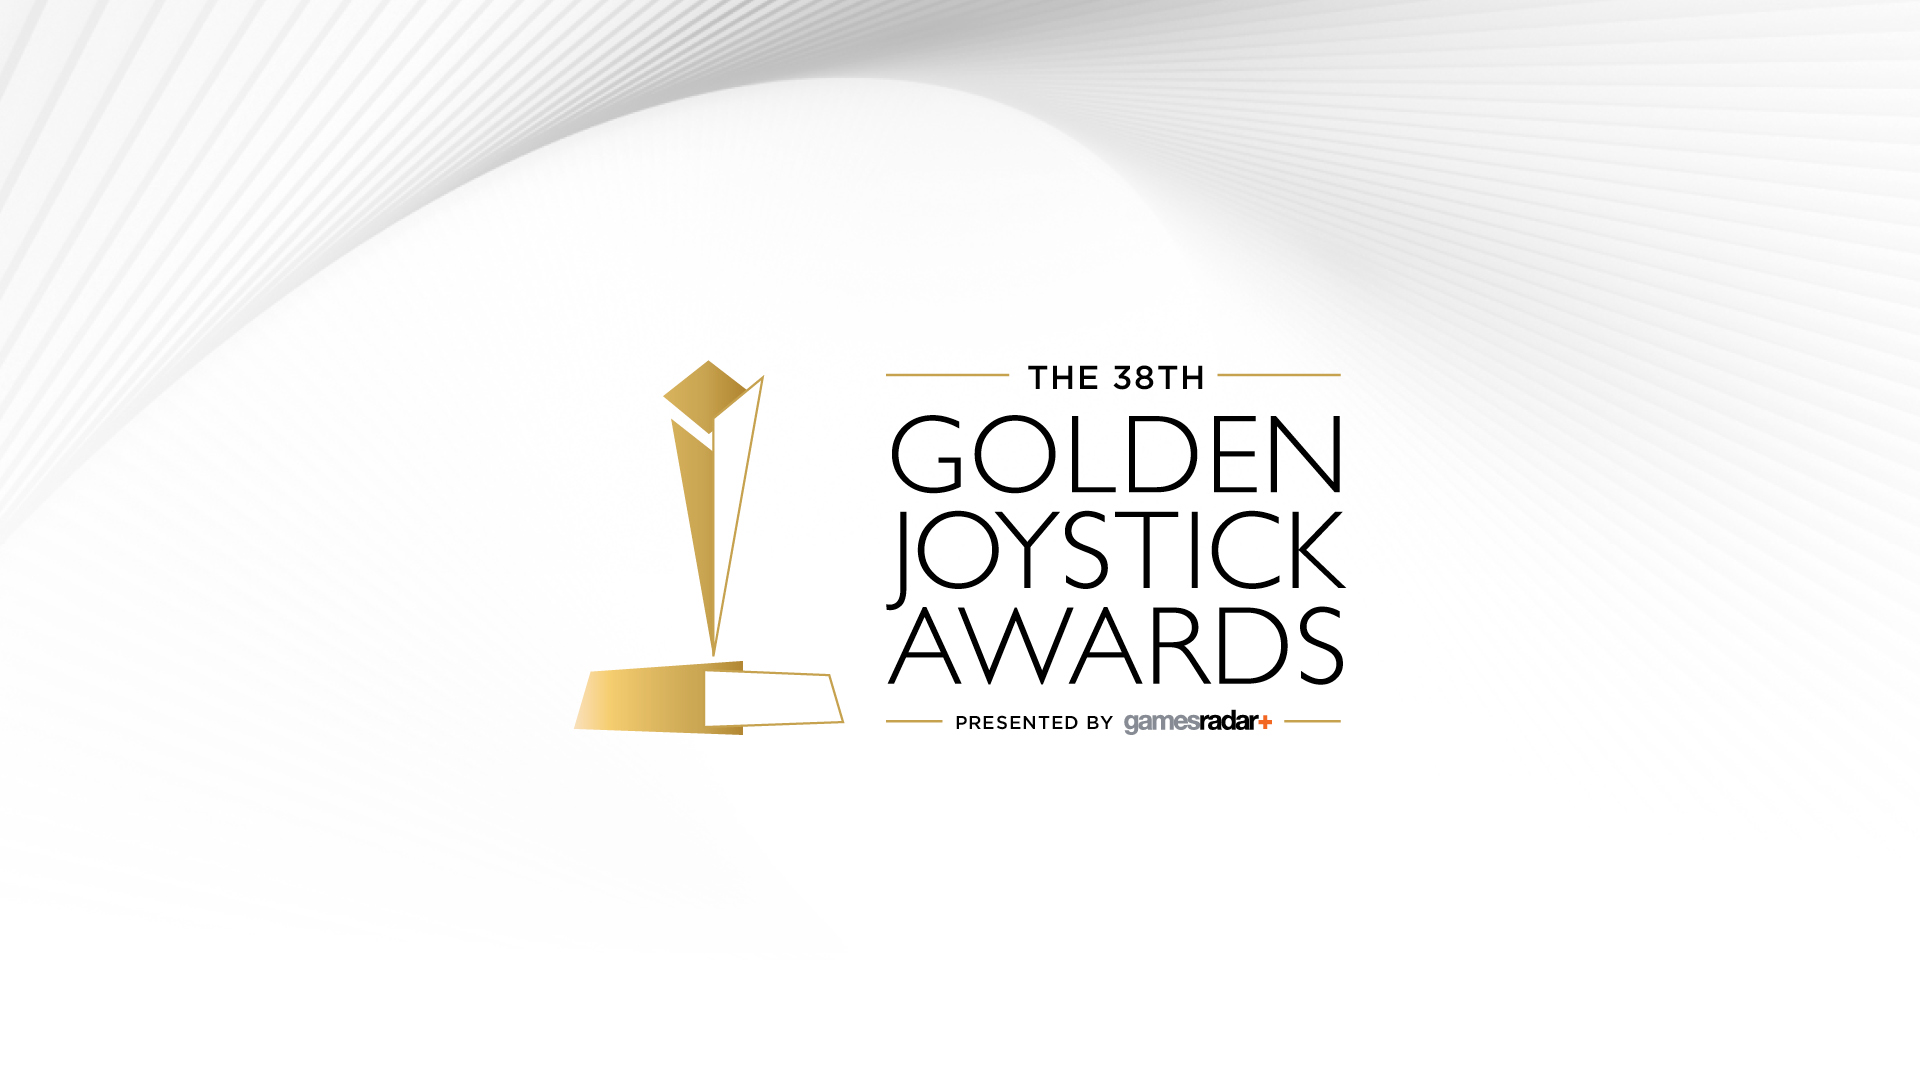 Voting is live for the Golden Joystick Awards 2020 nominations